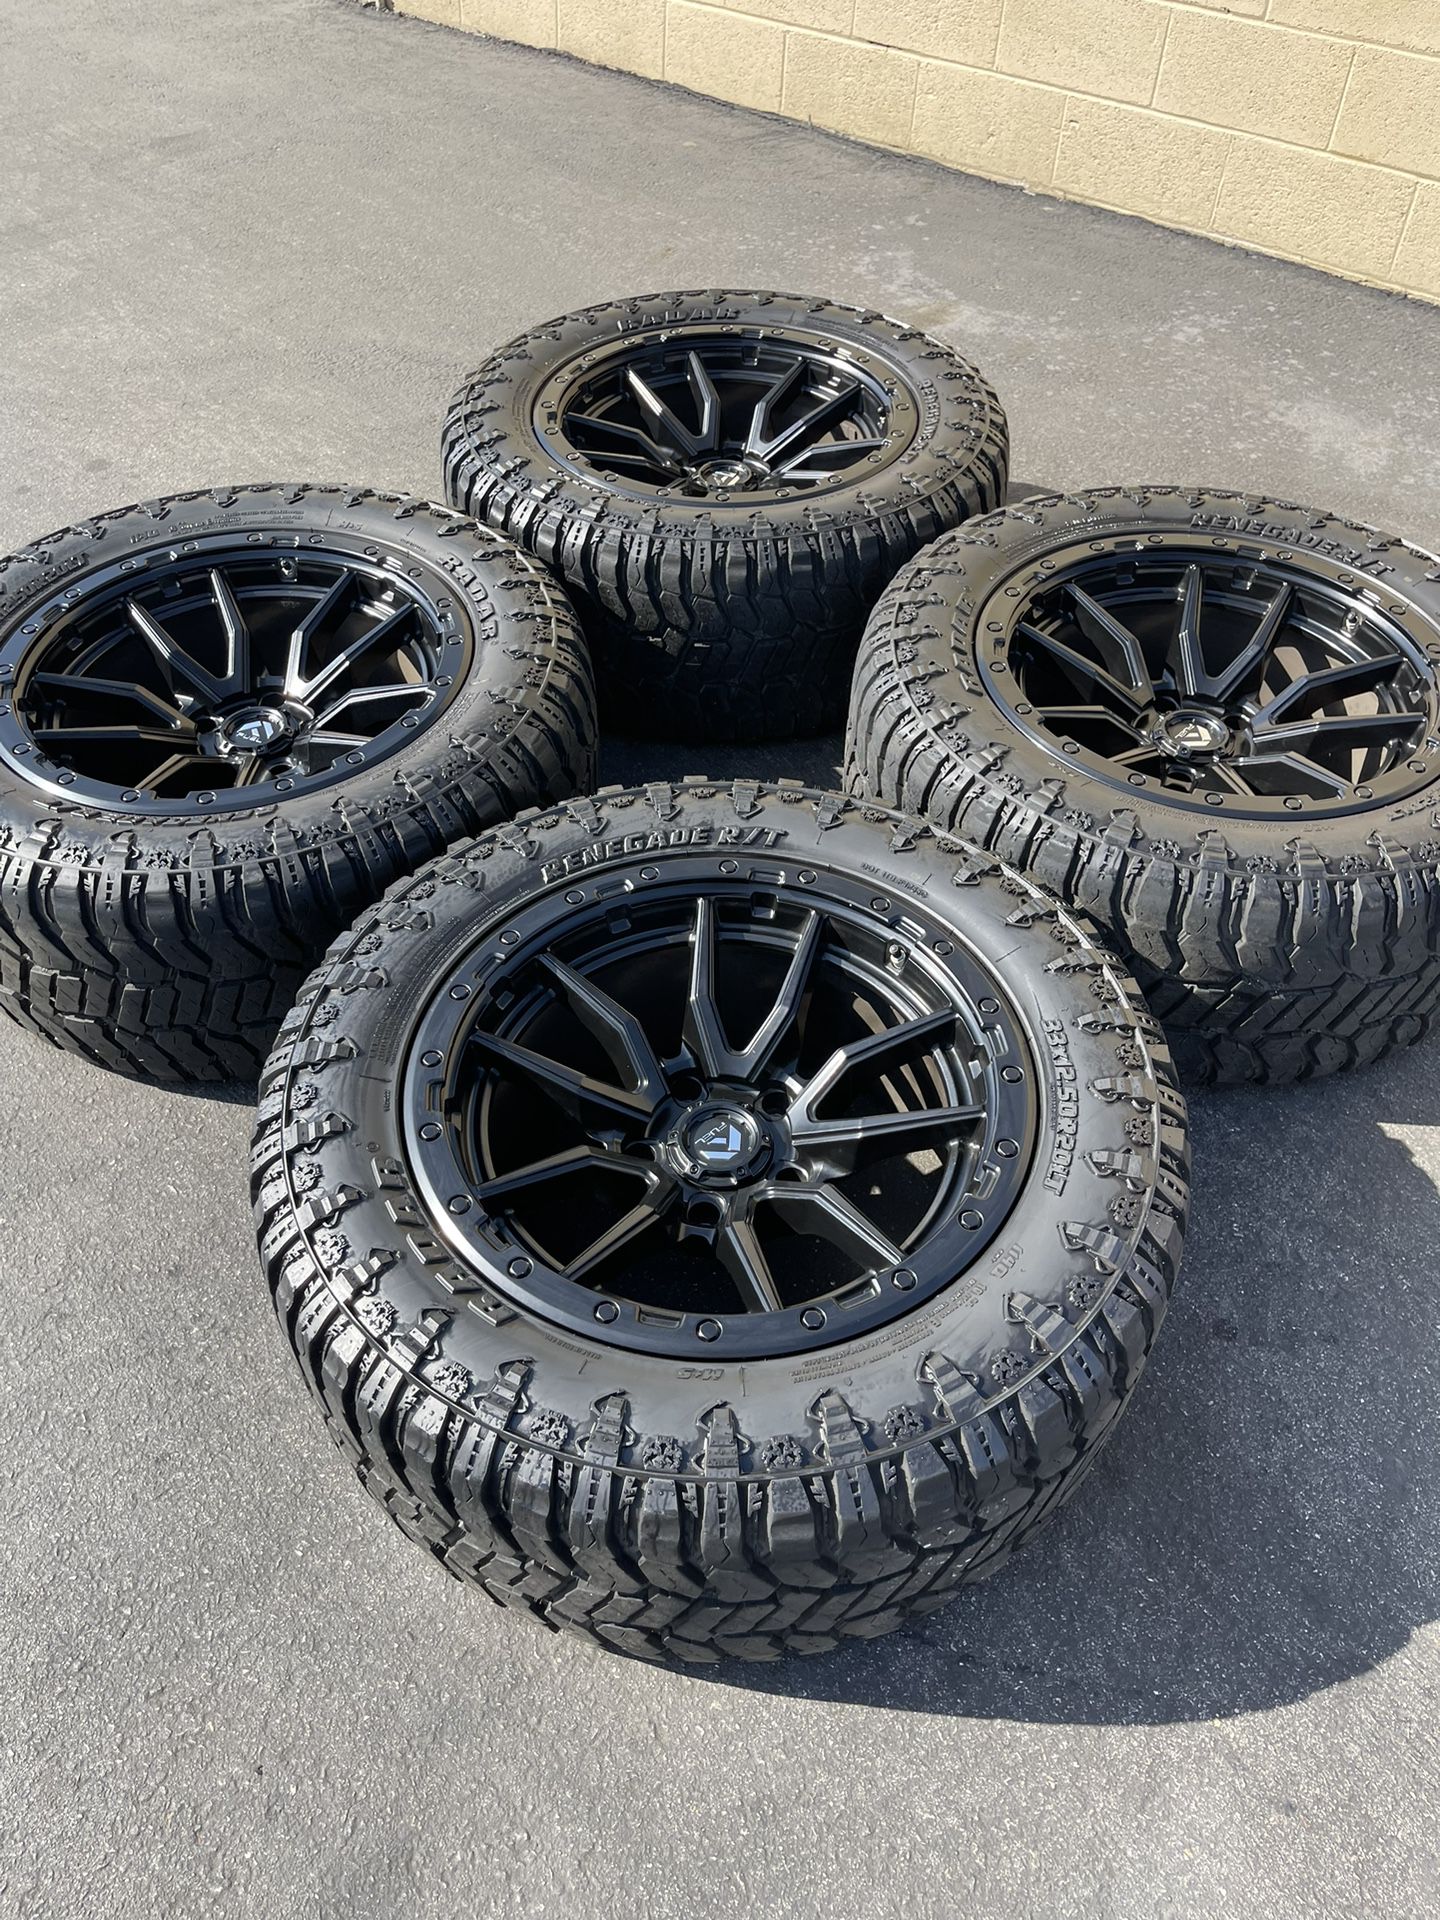 Tundra Sequoia Land Cruiser Fuel Rebel 20” Wheels And 33” R/T Tires Rims Rines